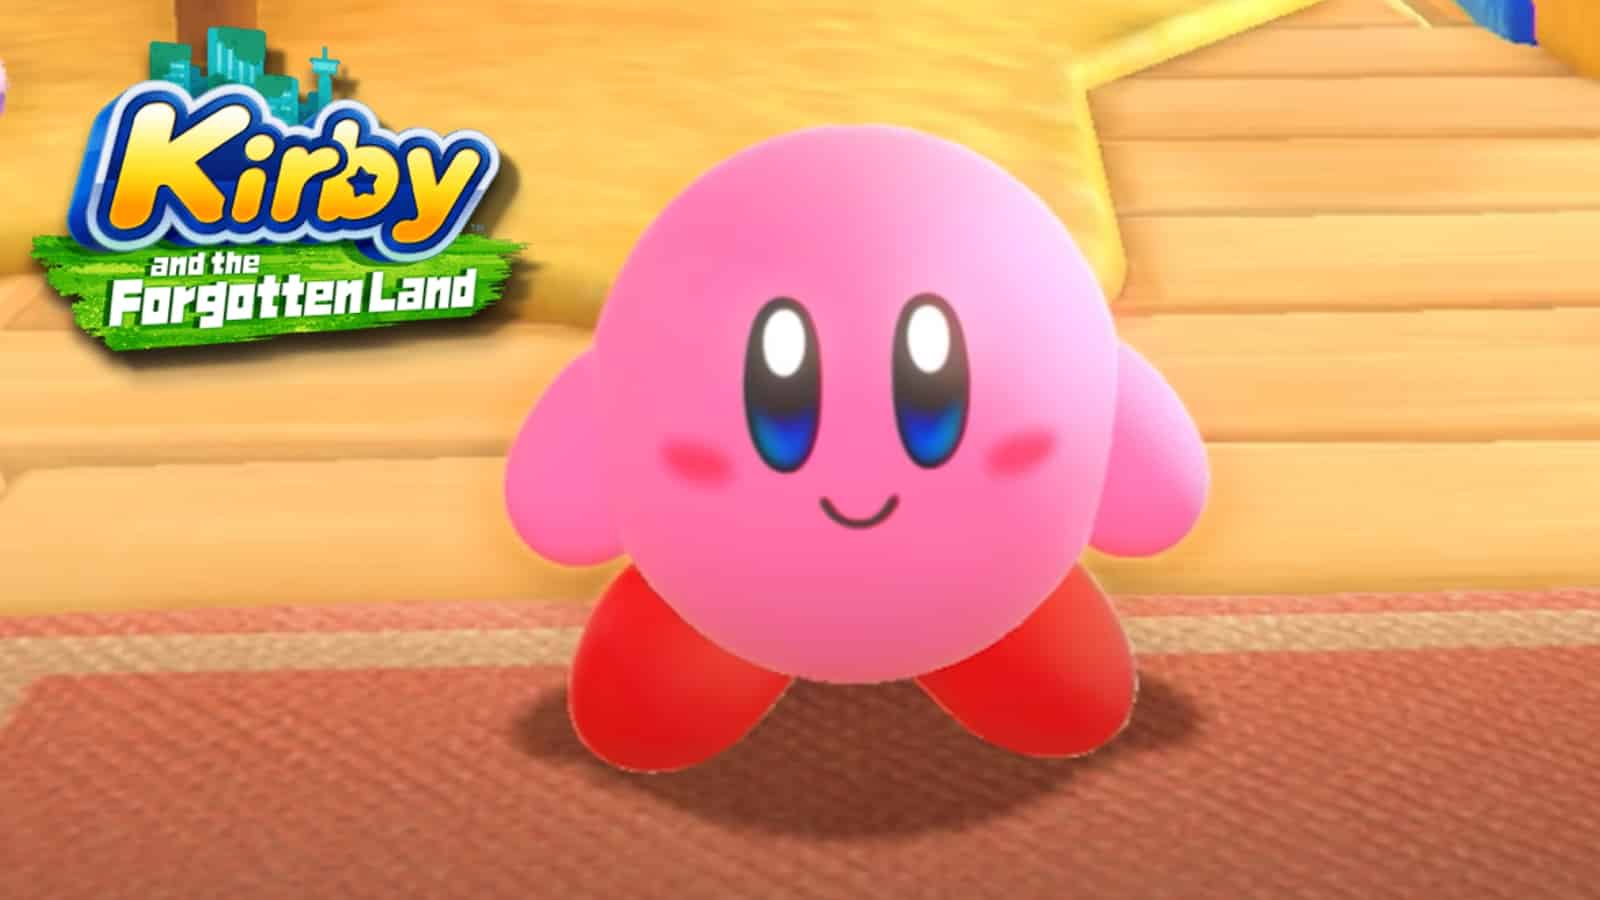 Does Kirby and the Forgotten Land have online co-op? - Dexerto